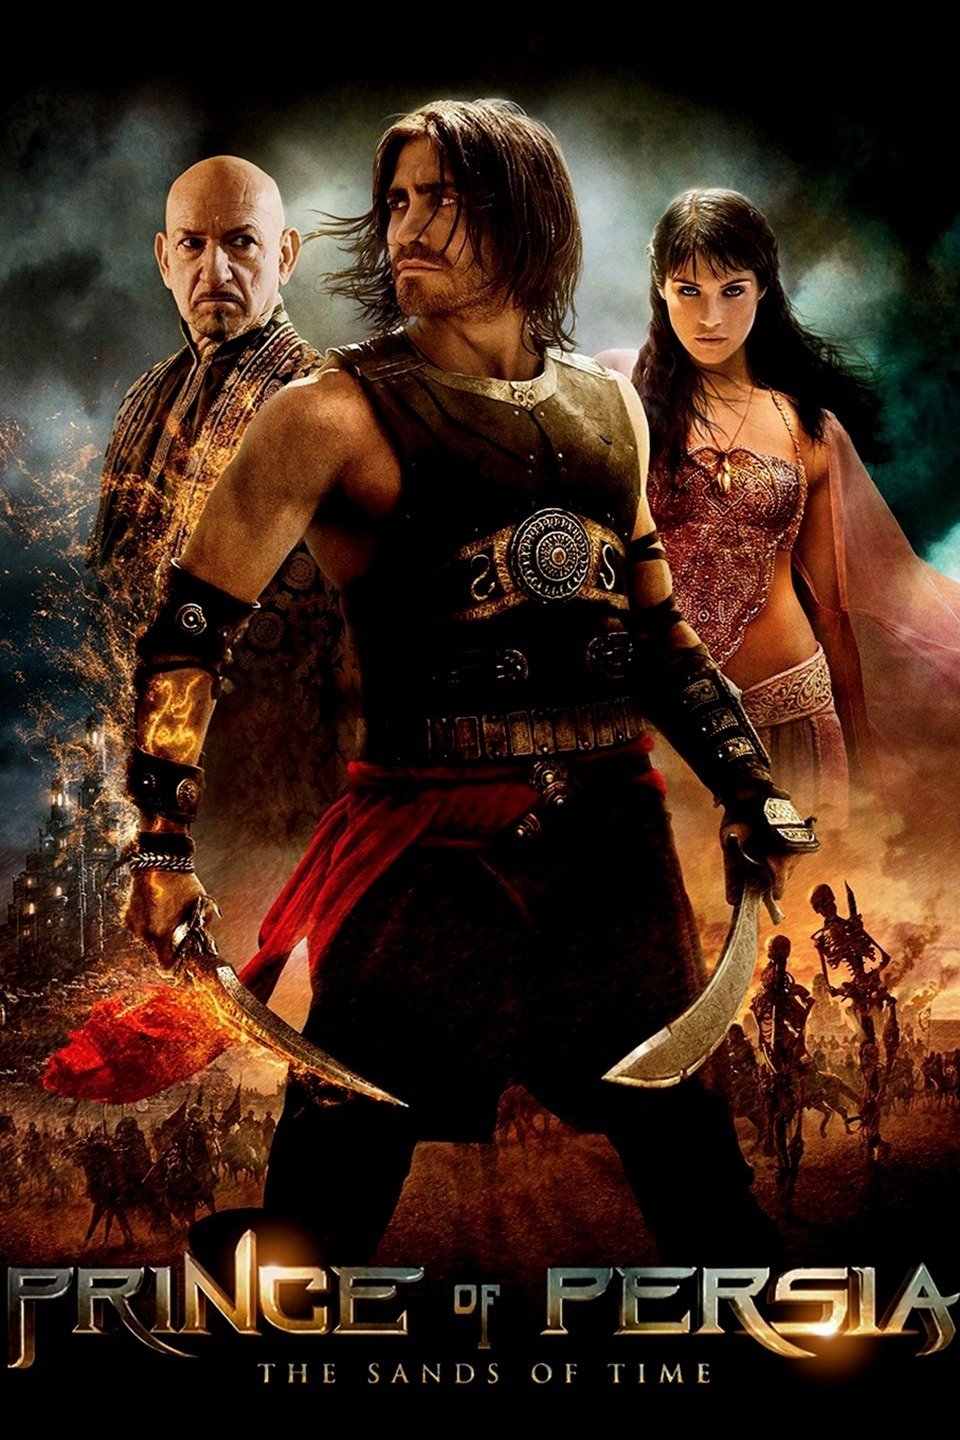 Prince of Persia: The Sands of Time - Rotten Tomatoes